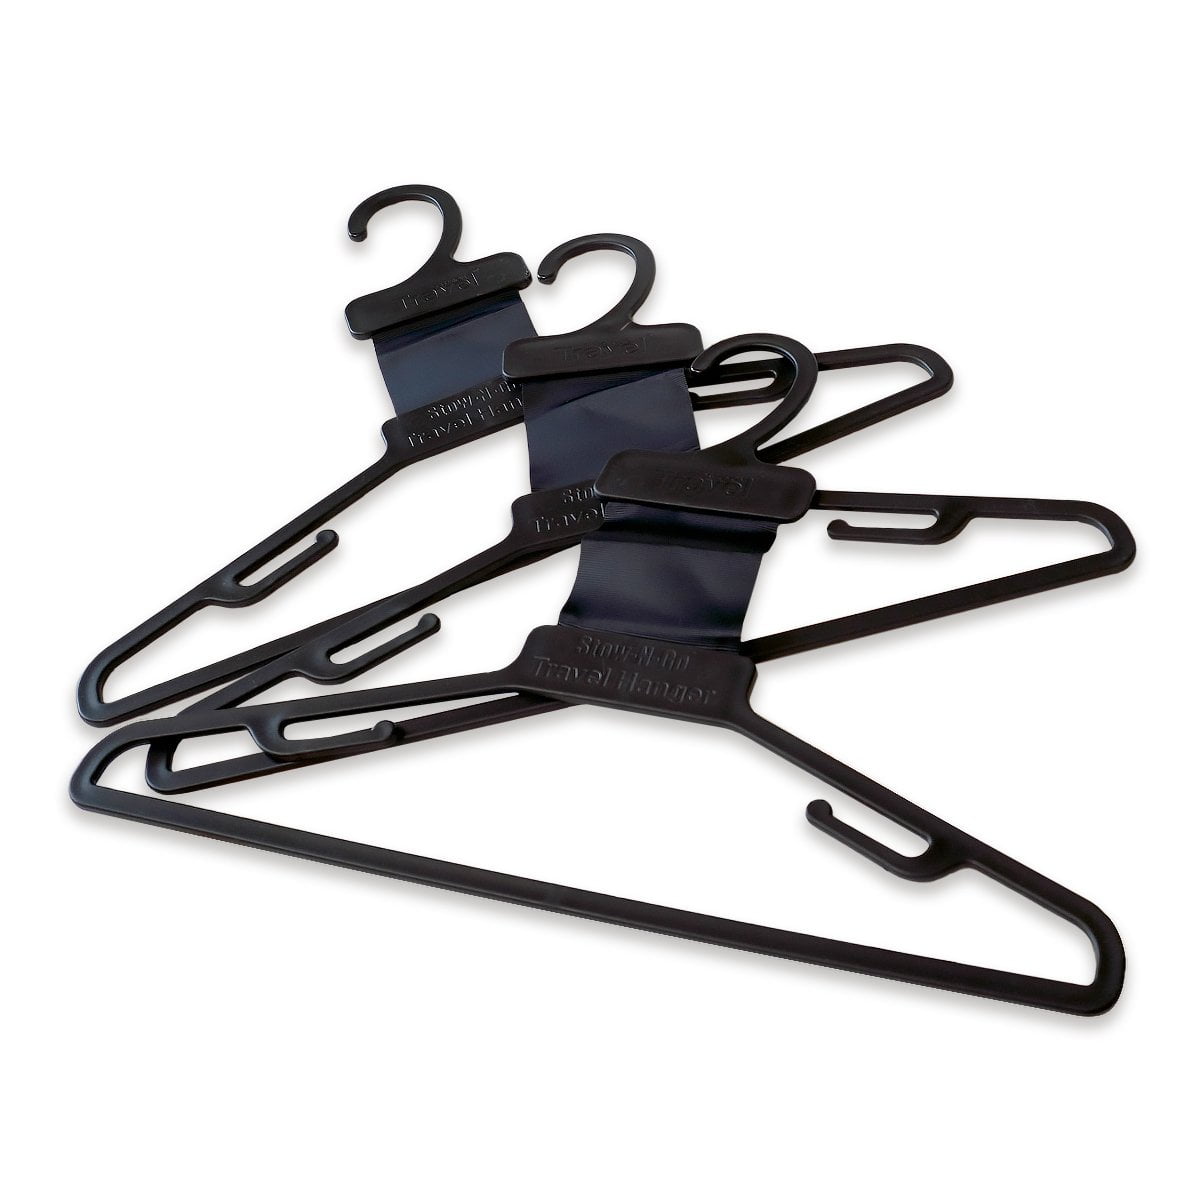 Set of 3 Innovative and Original Design with Space Saving Potential - Highly Compact Easy Storage and Carry OXVIATOR Travel Products OXVHangers1 OXVIATOR Collapsible Travel Hangers 